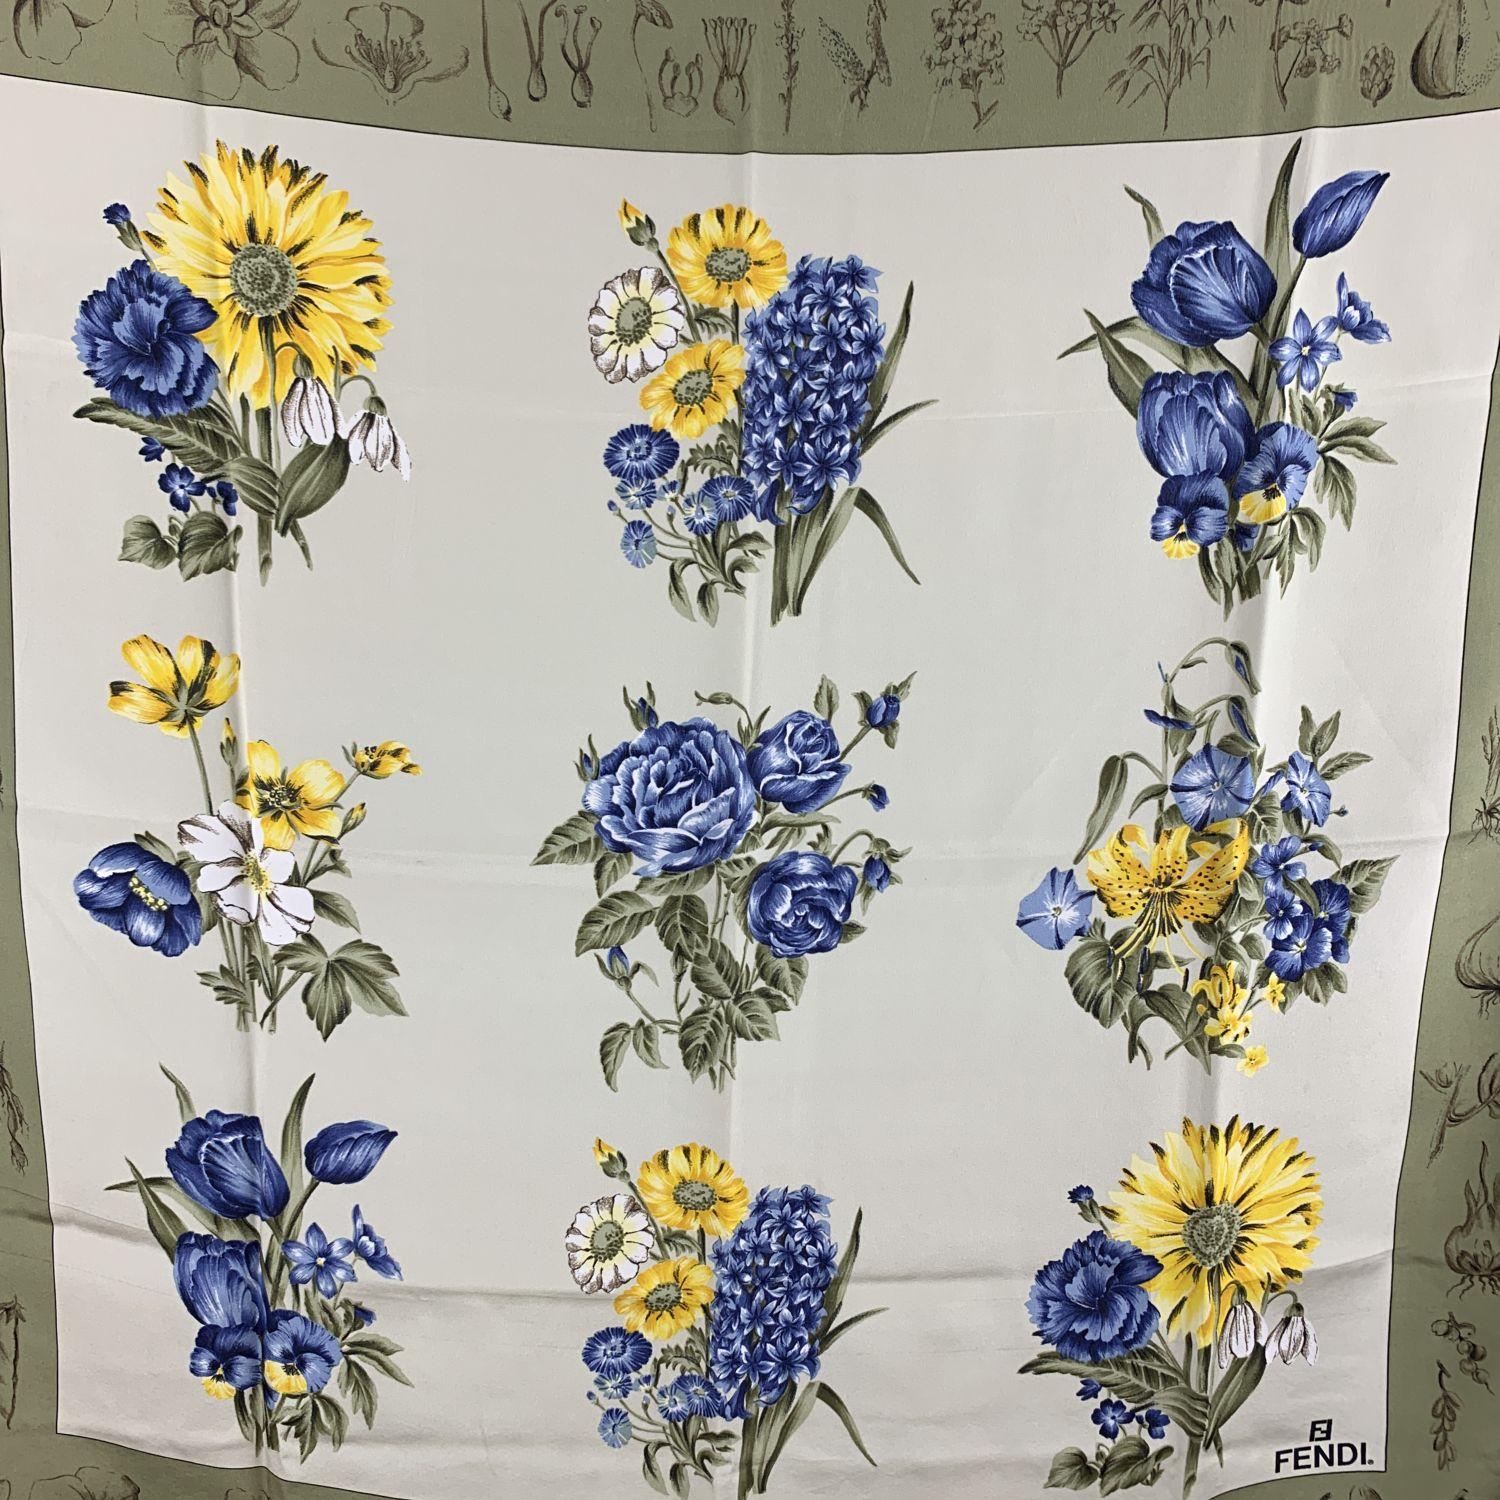 Vintage silk scarf by Fendi. Floral print. main colors are green, blue, and yellow. It measures approx. 90cm by 90cm. 'Fendi - Made in Italy' tag still attached. Fendi care/composition tag still attached.





Details

MATERIAL: Silk

COLOR: